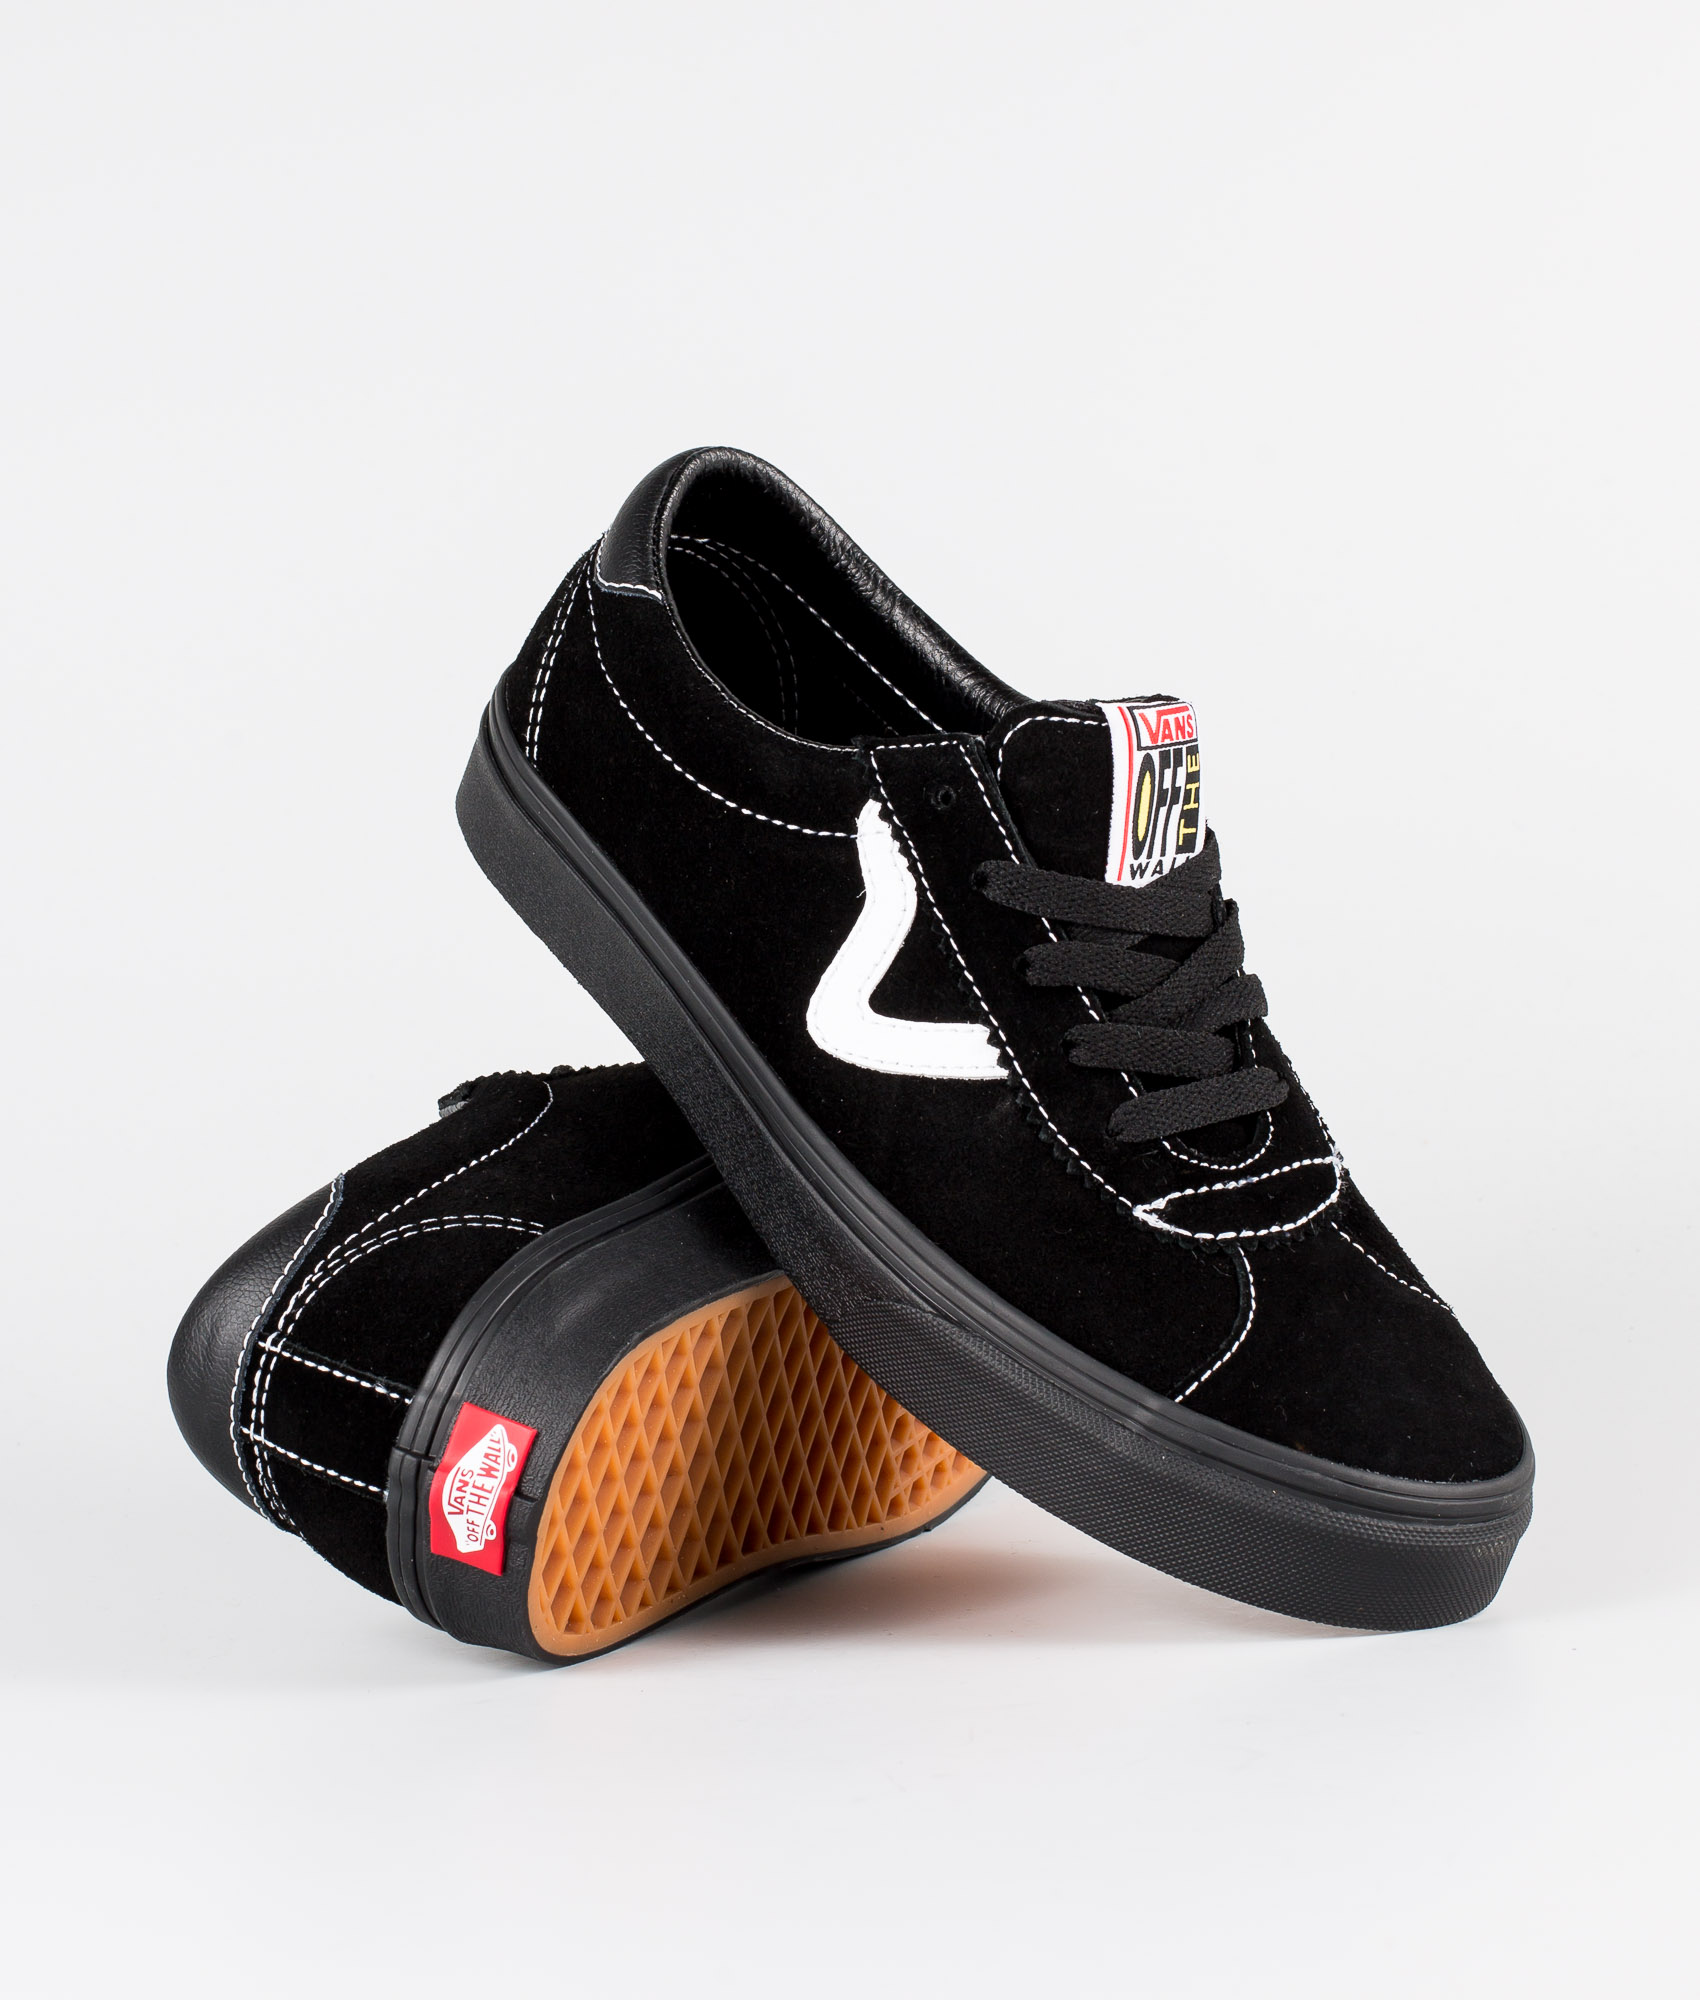 black vans off the wall shoes